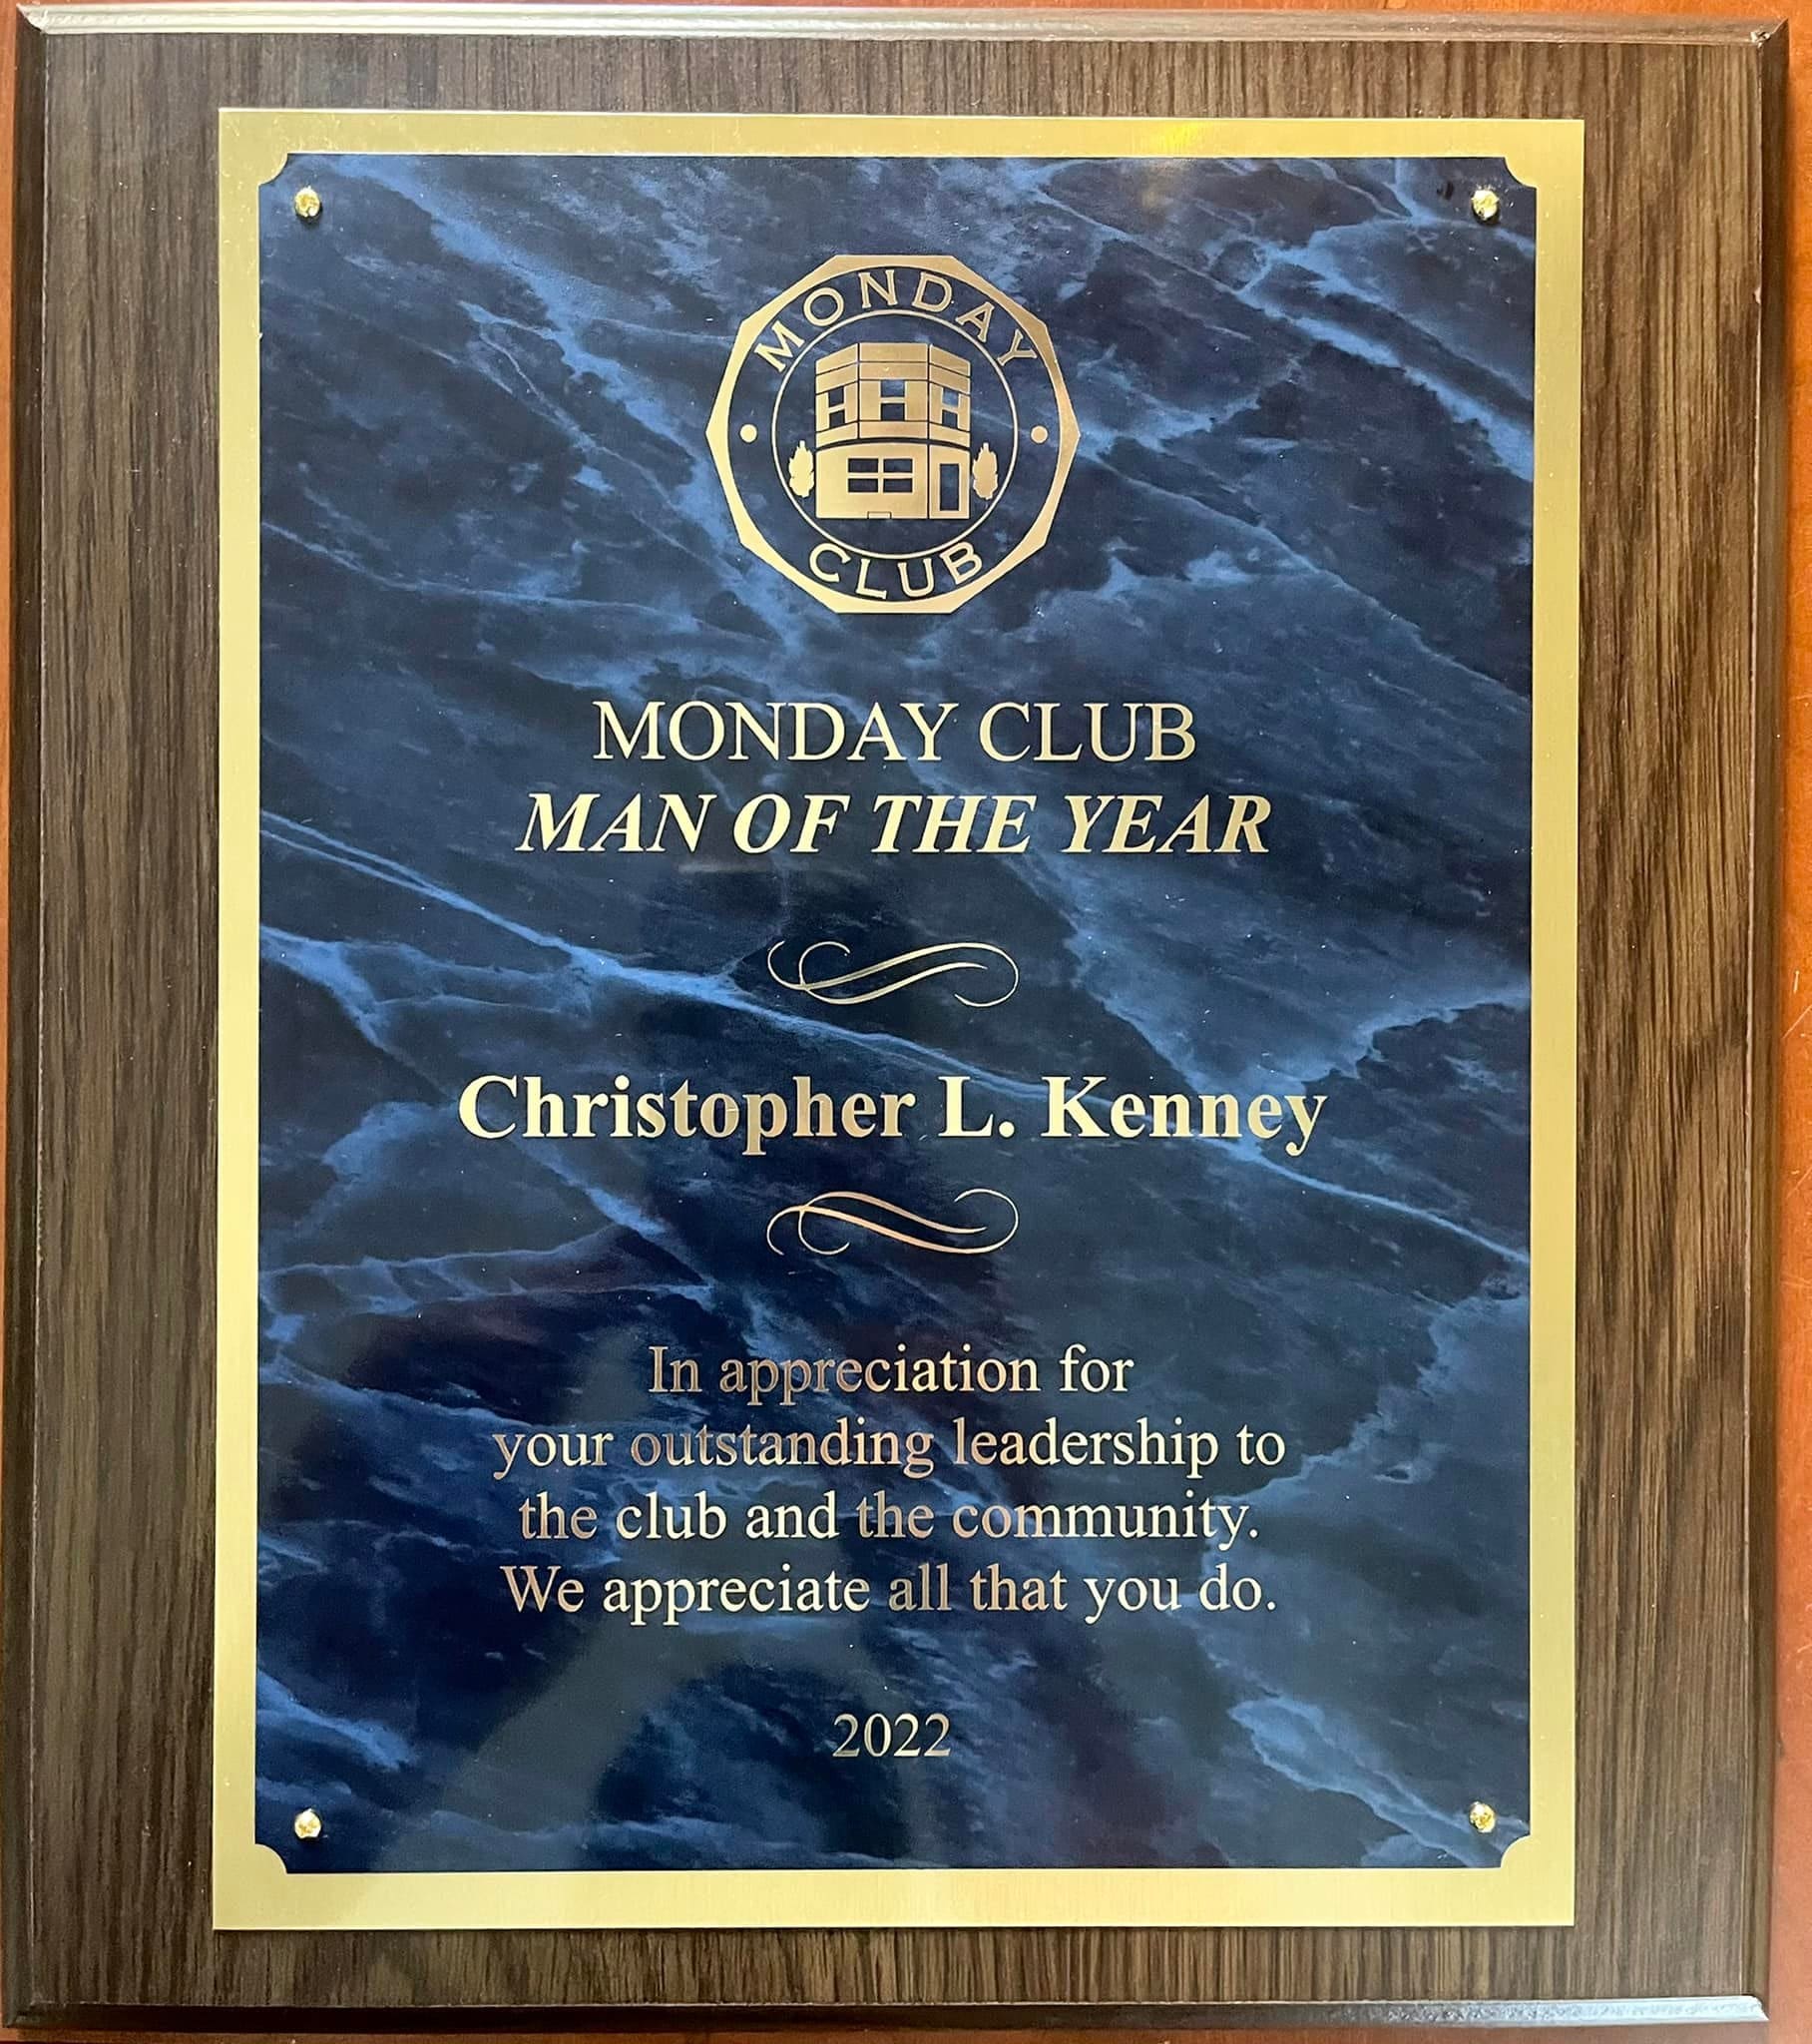 The Monday Club has named Chris Kenny and Venter Wright their 2022 Men of the Year.